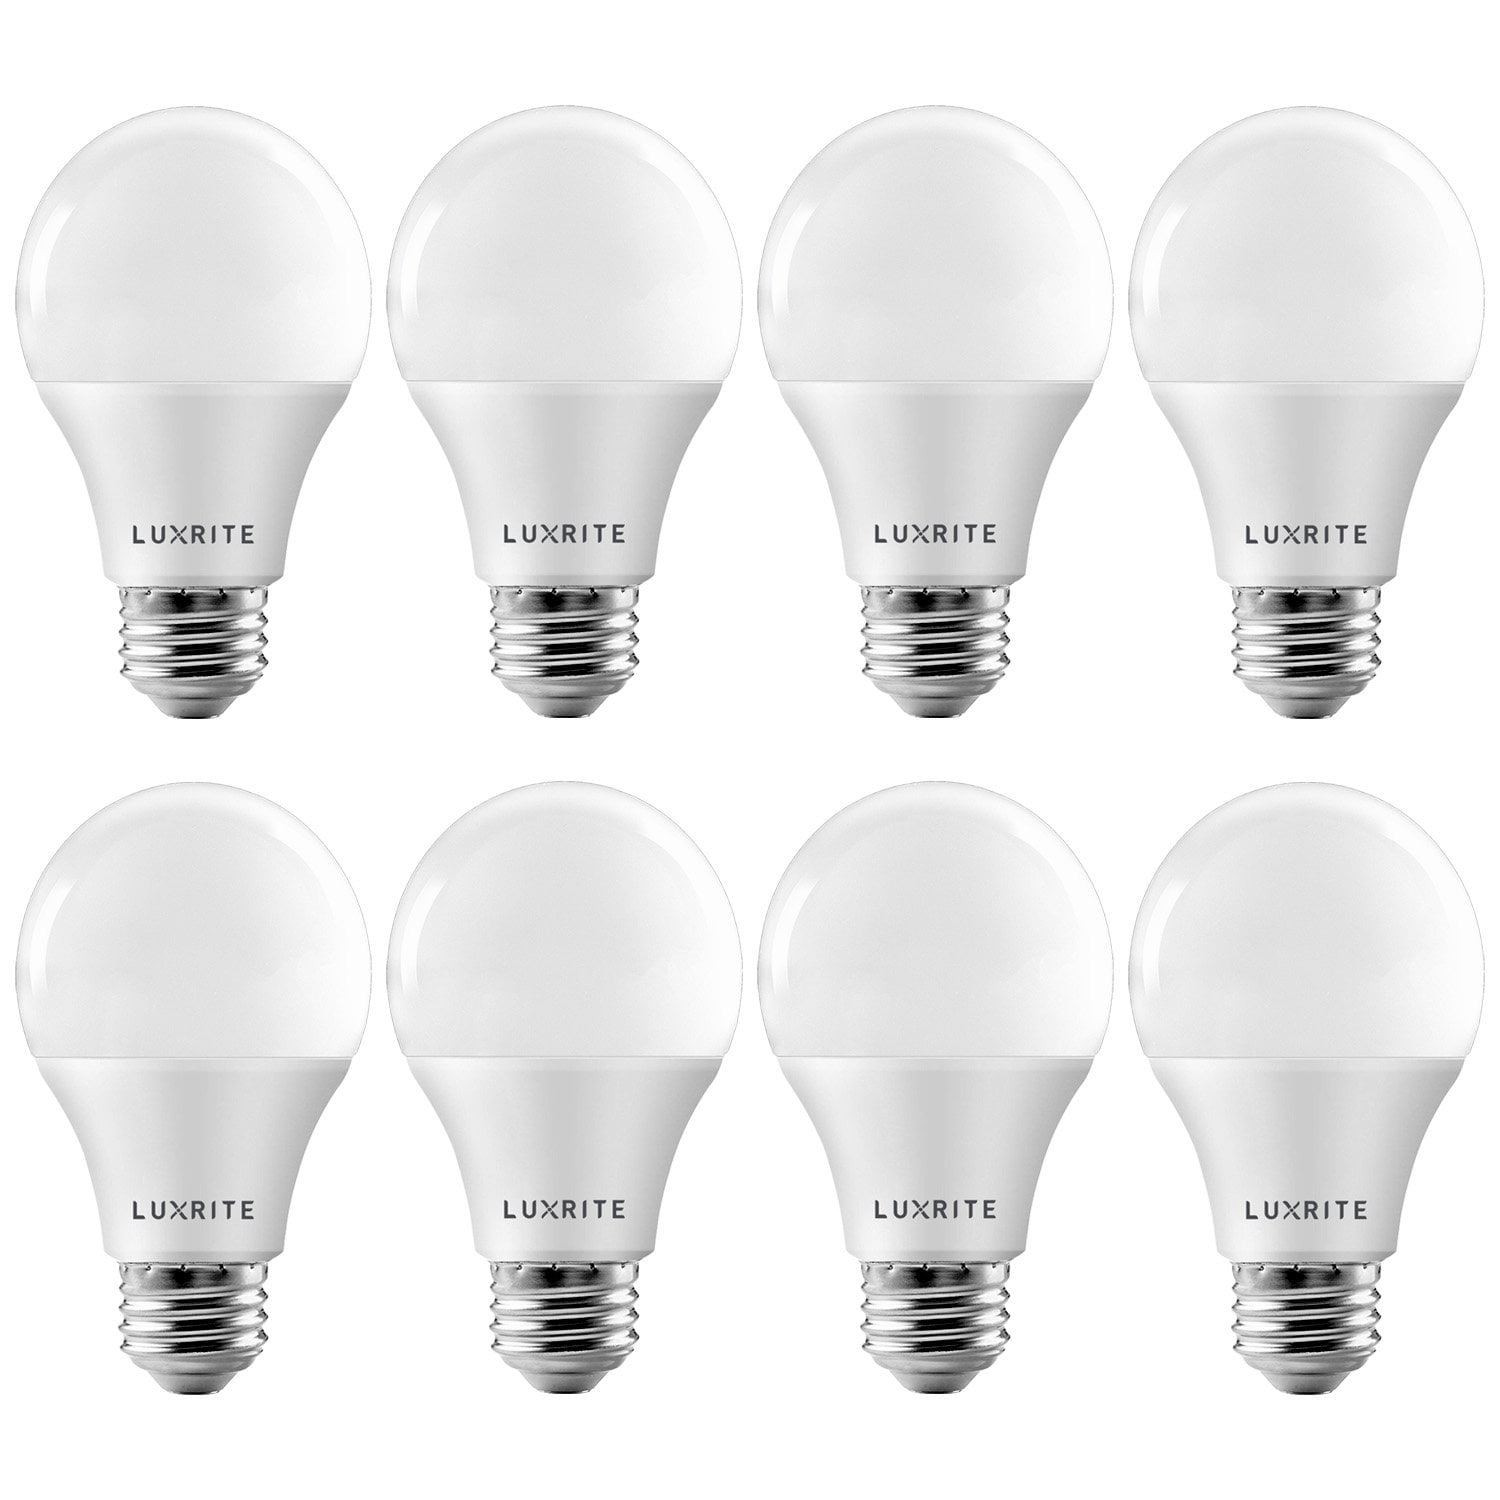 60W Laborate Lighting A19 LED Light Bulbs Commercial Lighting Energy Saving Outdoor & Indoor Home 800 Lumens 10-Year Life 8-Pack Dimmable Cool White 4000K Illumination 80+ CRI E26 Base 